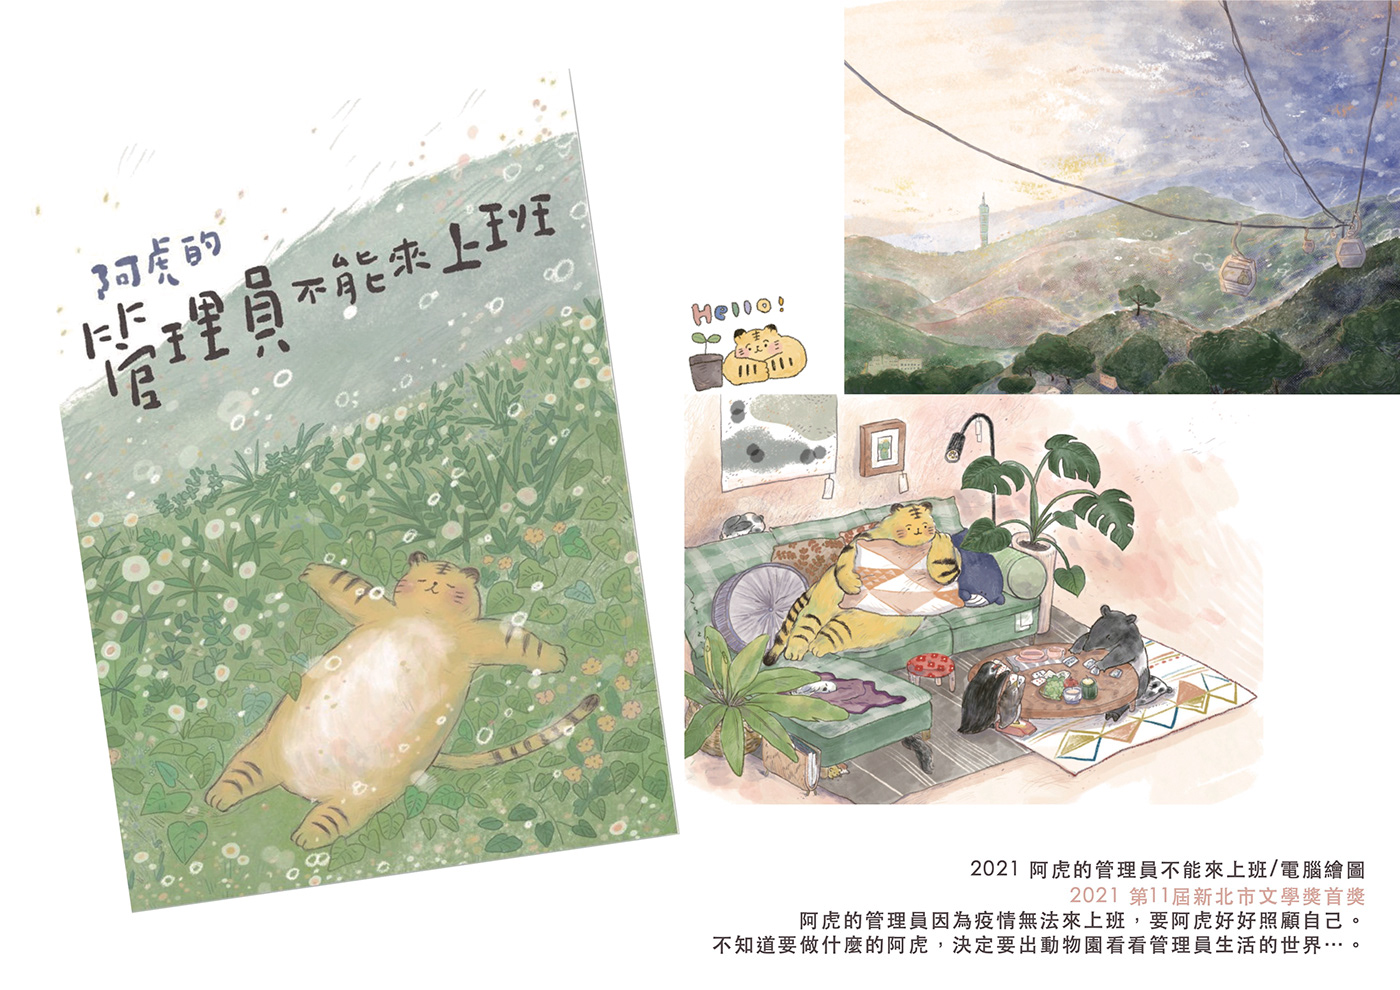 A-hu’s keeper couldn’t come to work
Vista Publishing , Taiwan, 2021.
ISBN 978-986-5462-82-6
